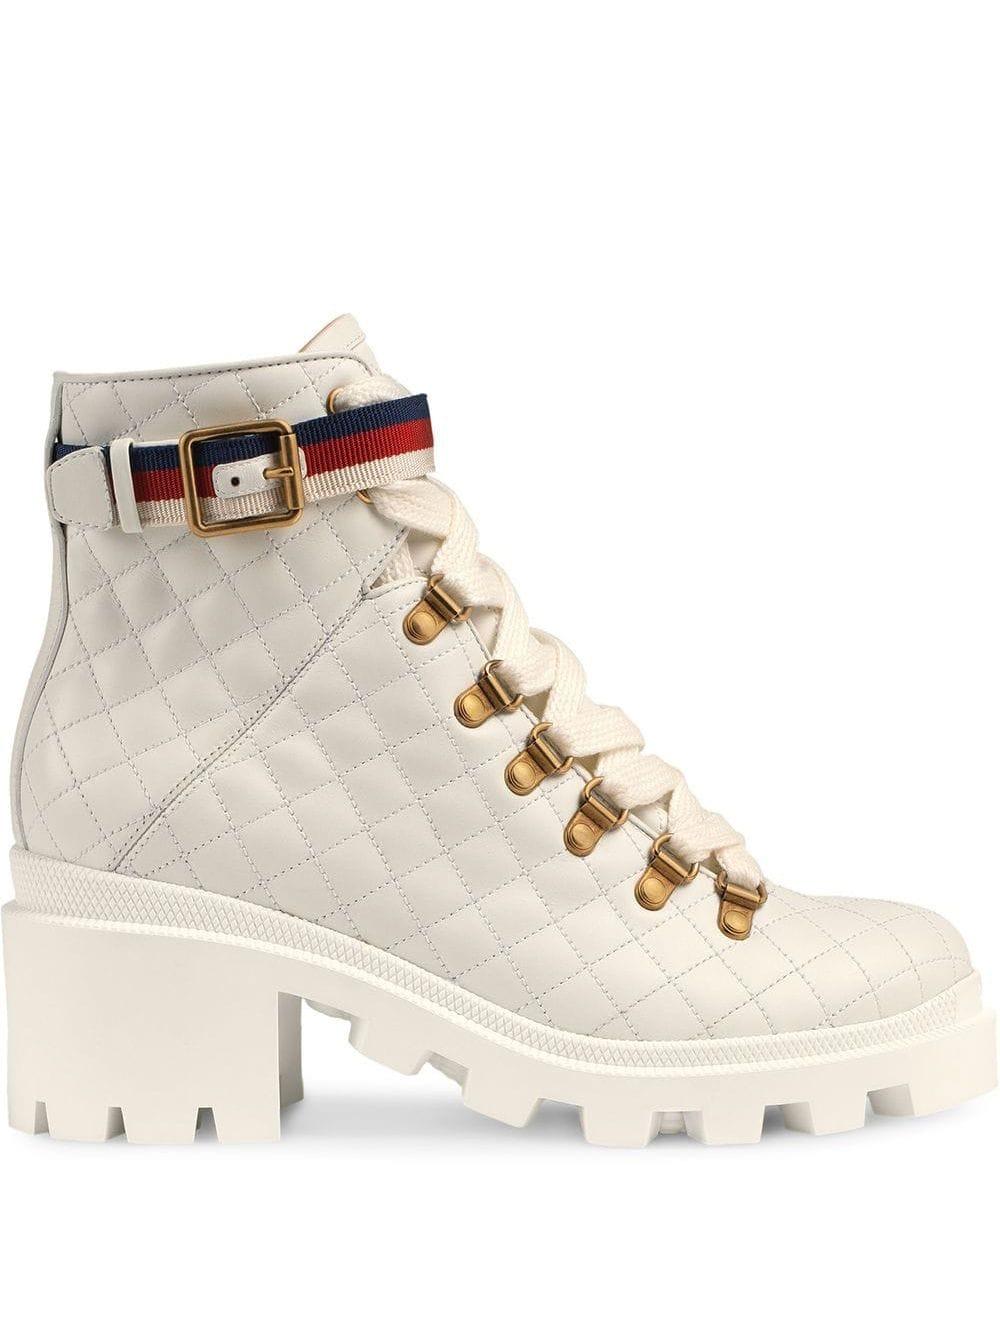 Socialisme moden utålmodig Gucci Quilted Leather Ankle Boot With Belt in White | Lyst